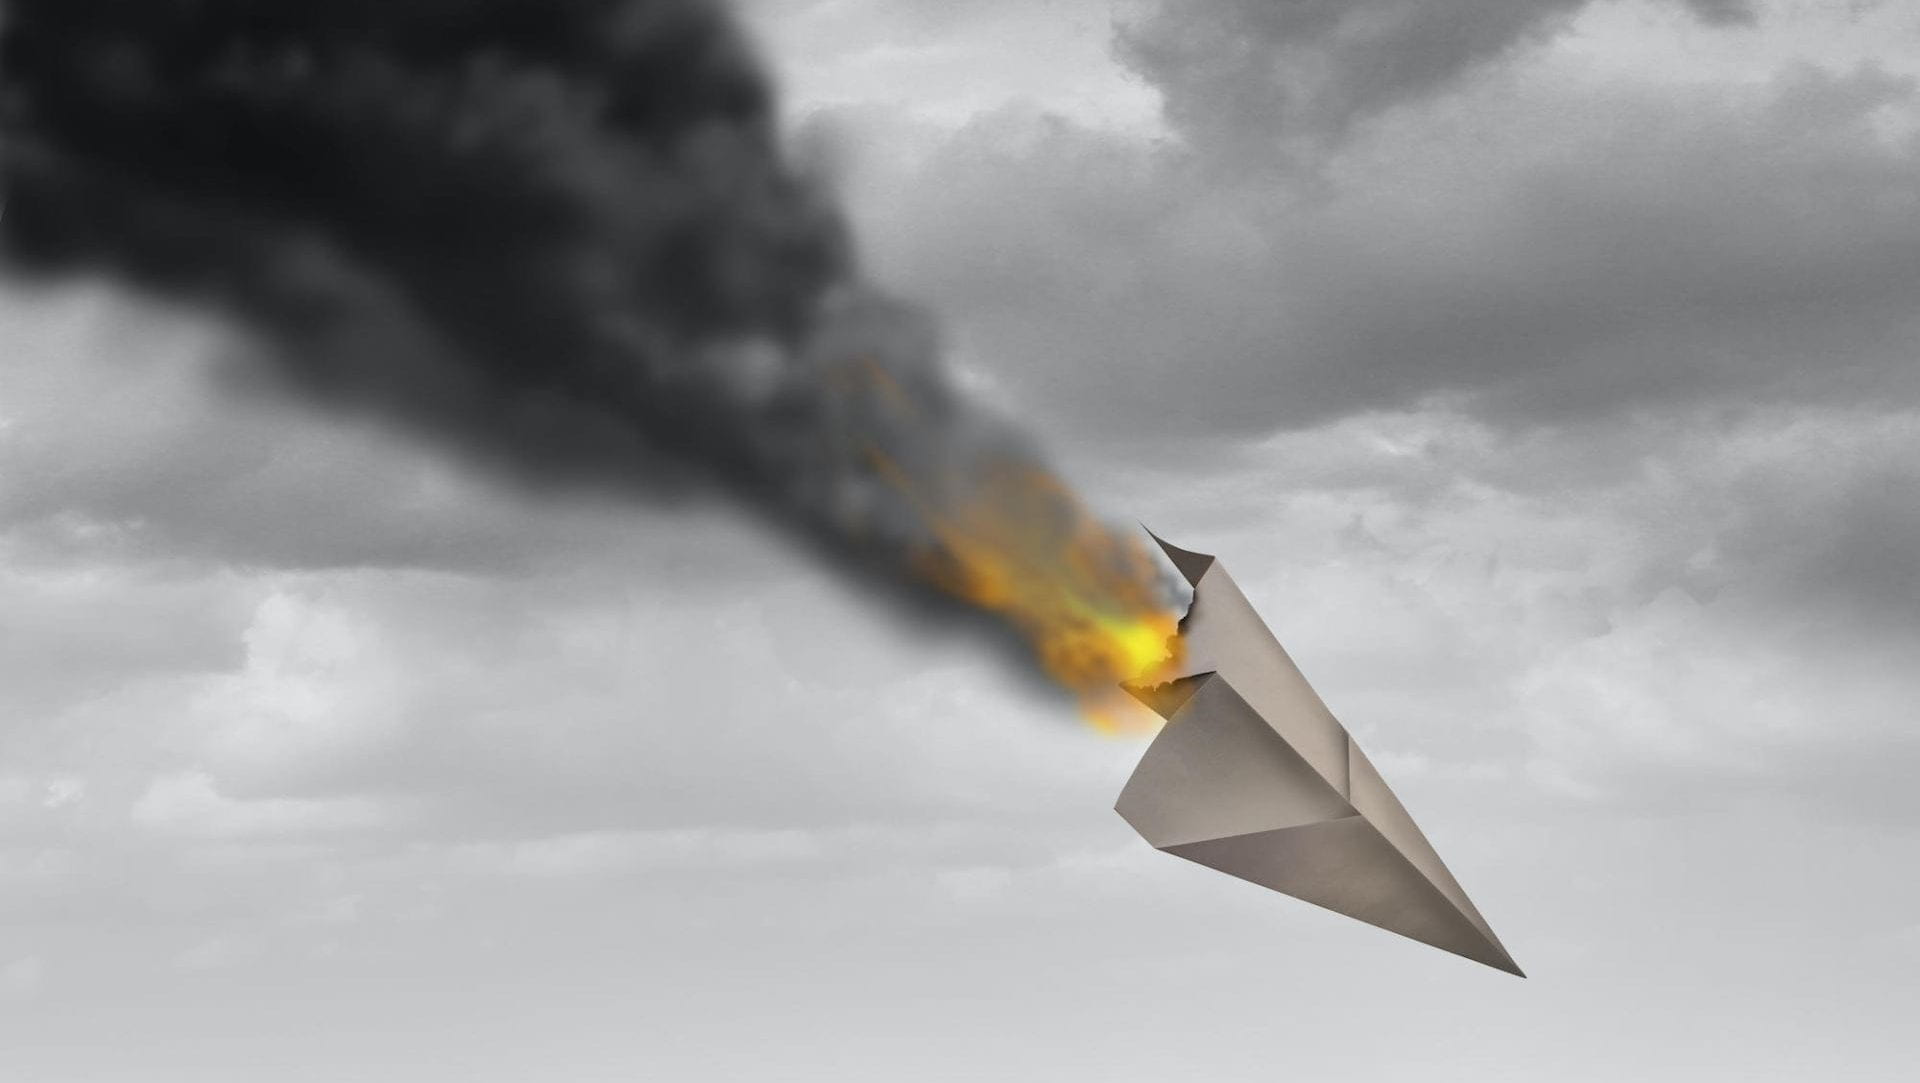 A paper airplane on fire and falling